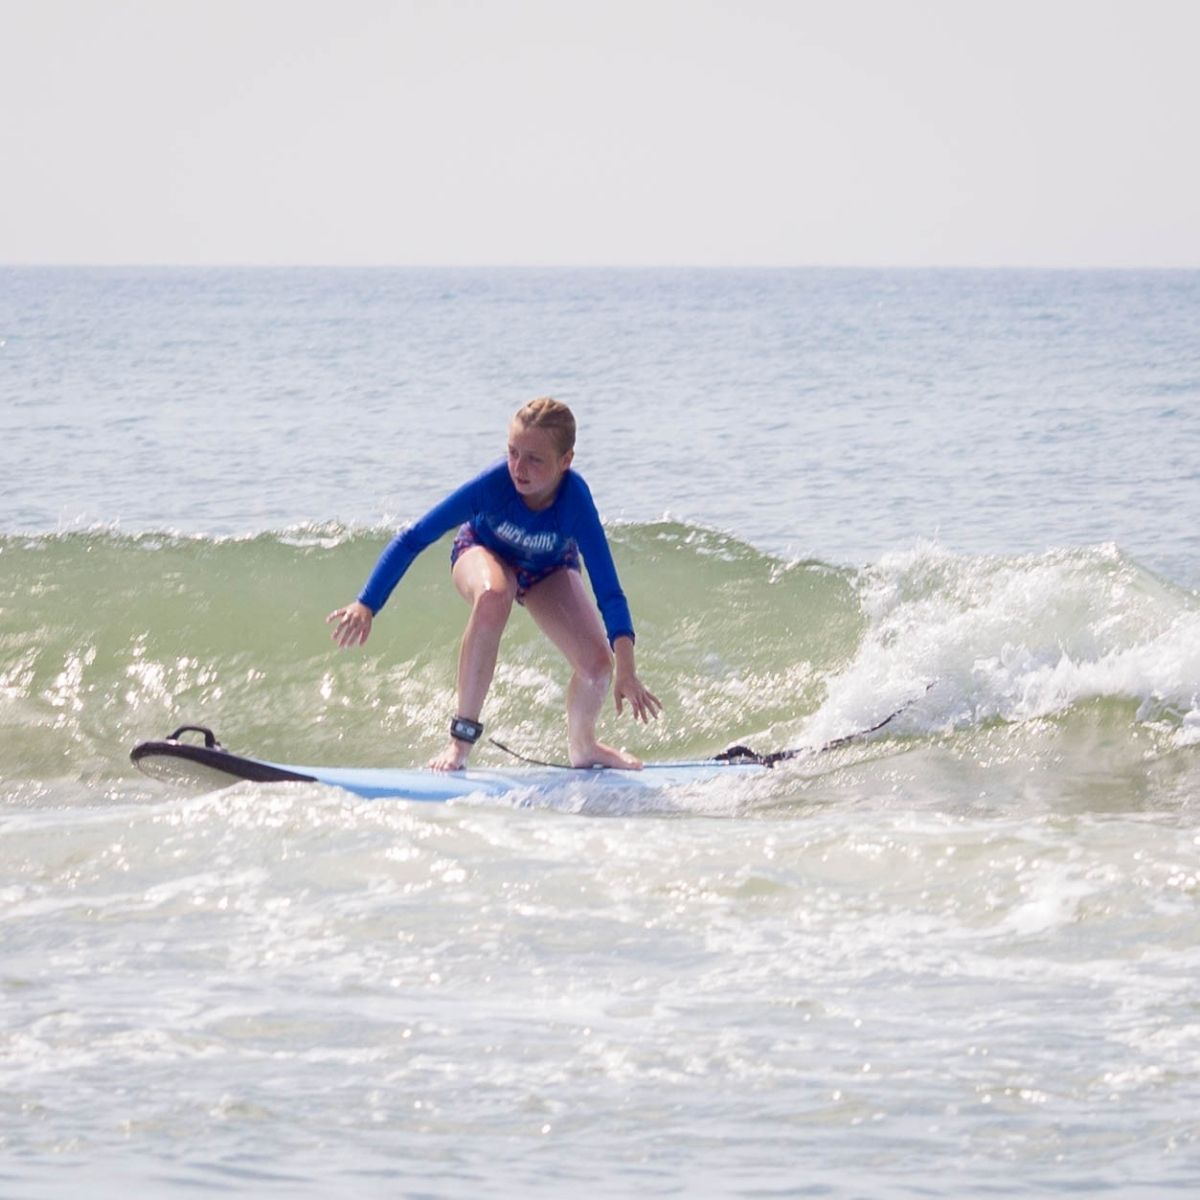 A young girl surfing at camp.